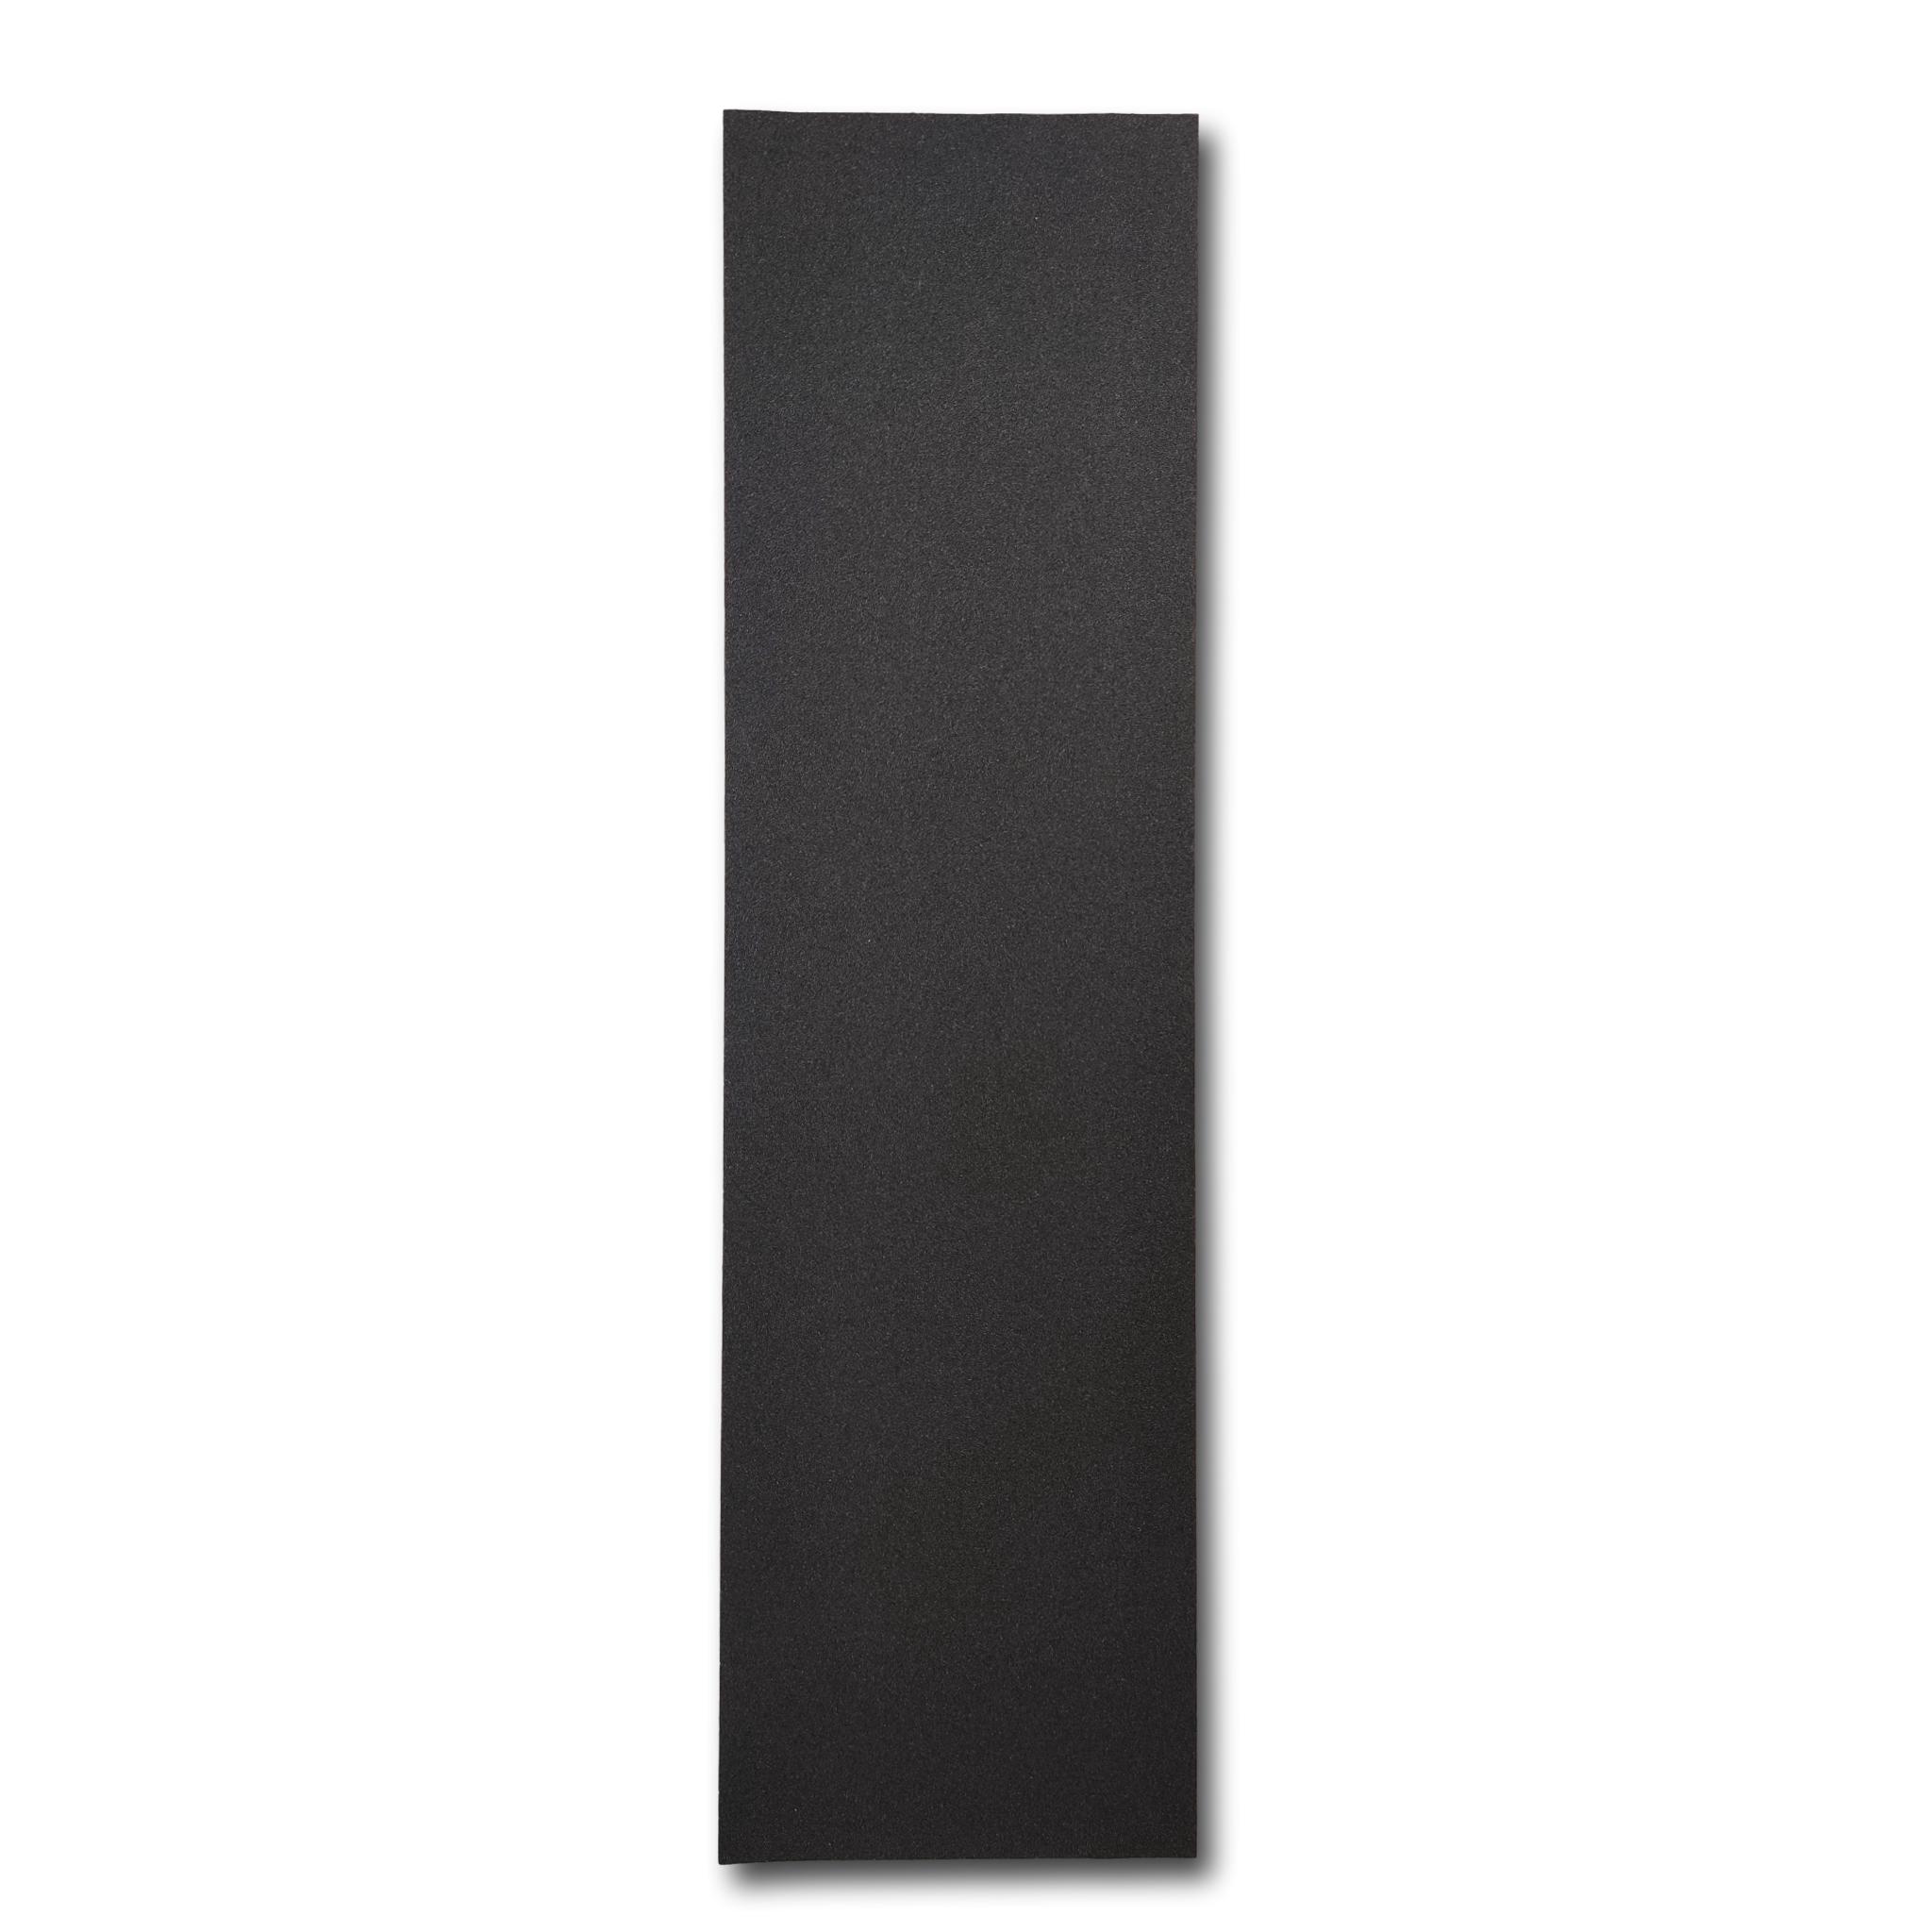 GRIZZLY GRIP TAPE BLACK SHEET 9